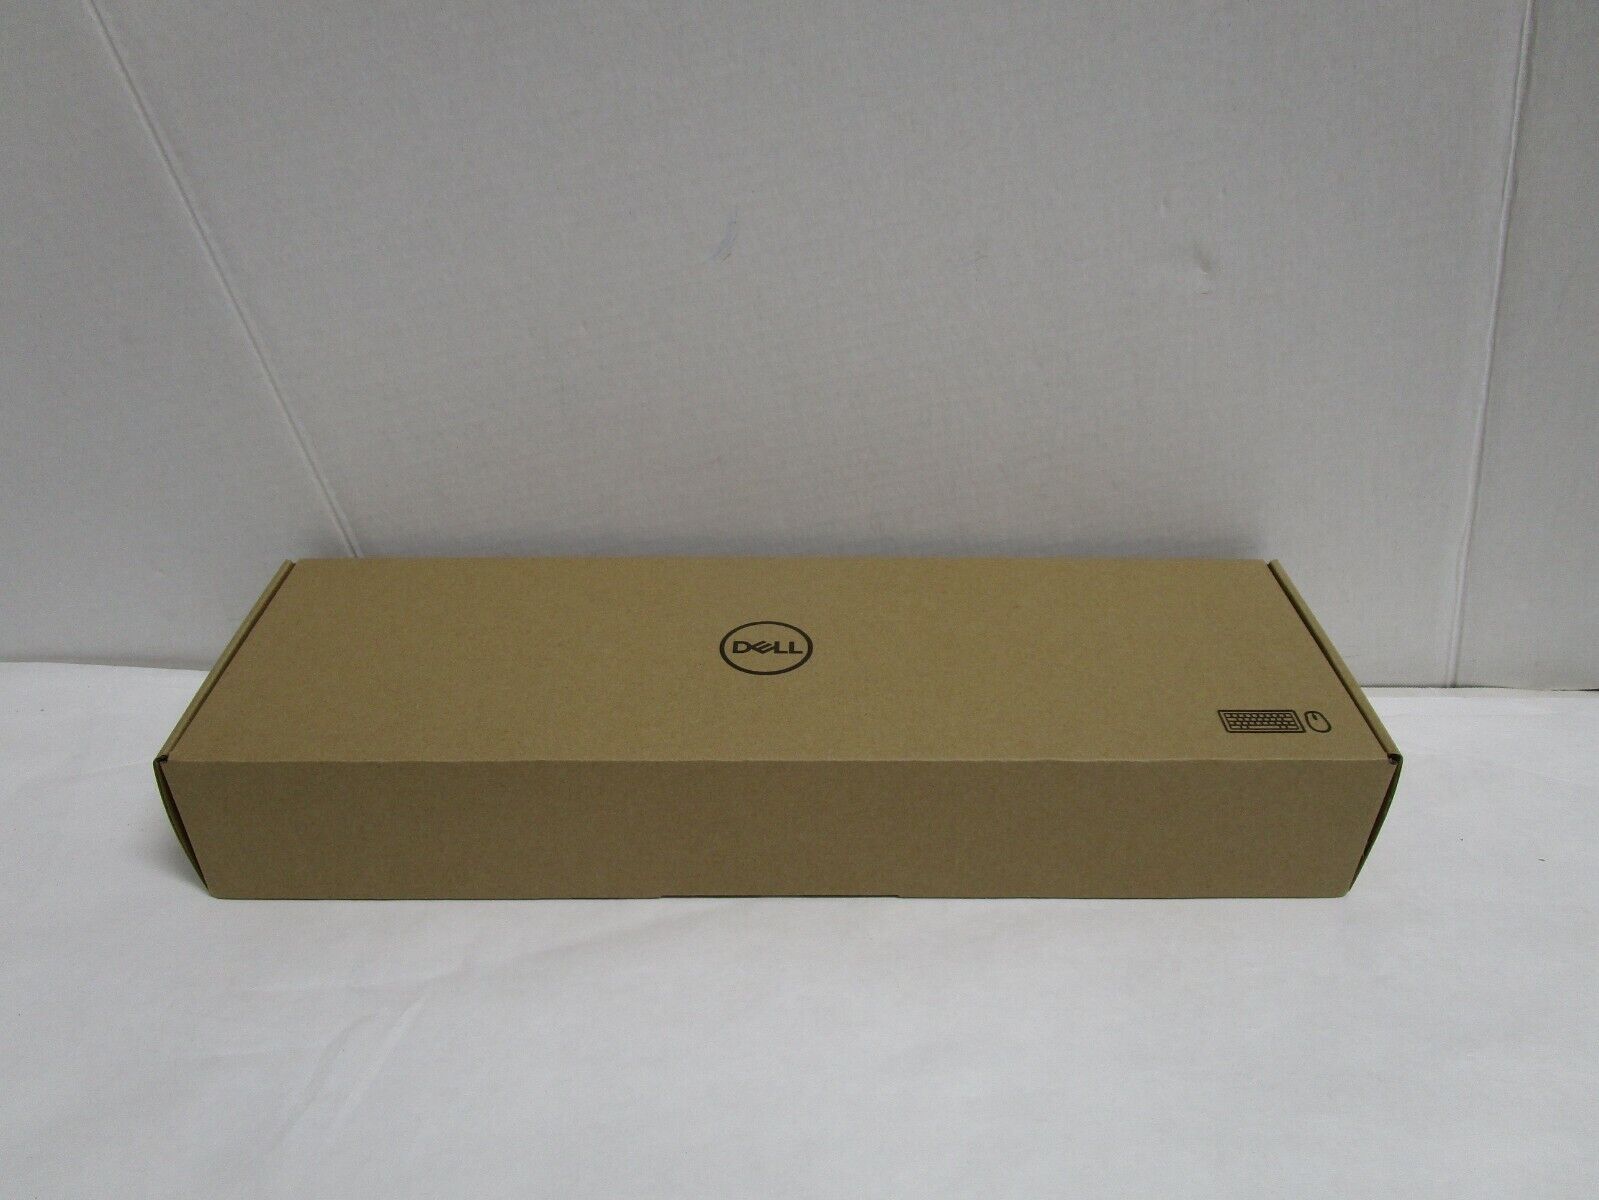 DELL Pro Wireless Keyboard & Mouse KM5221W NEW IN BOX SEE PHOTOS SHIPS FREE